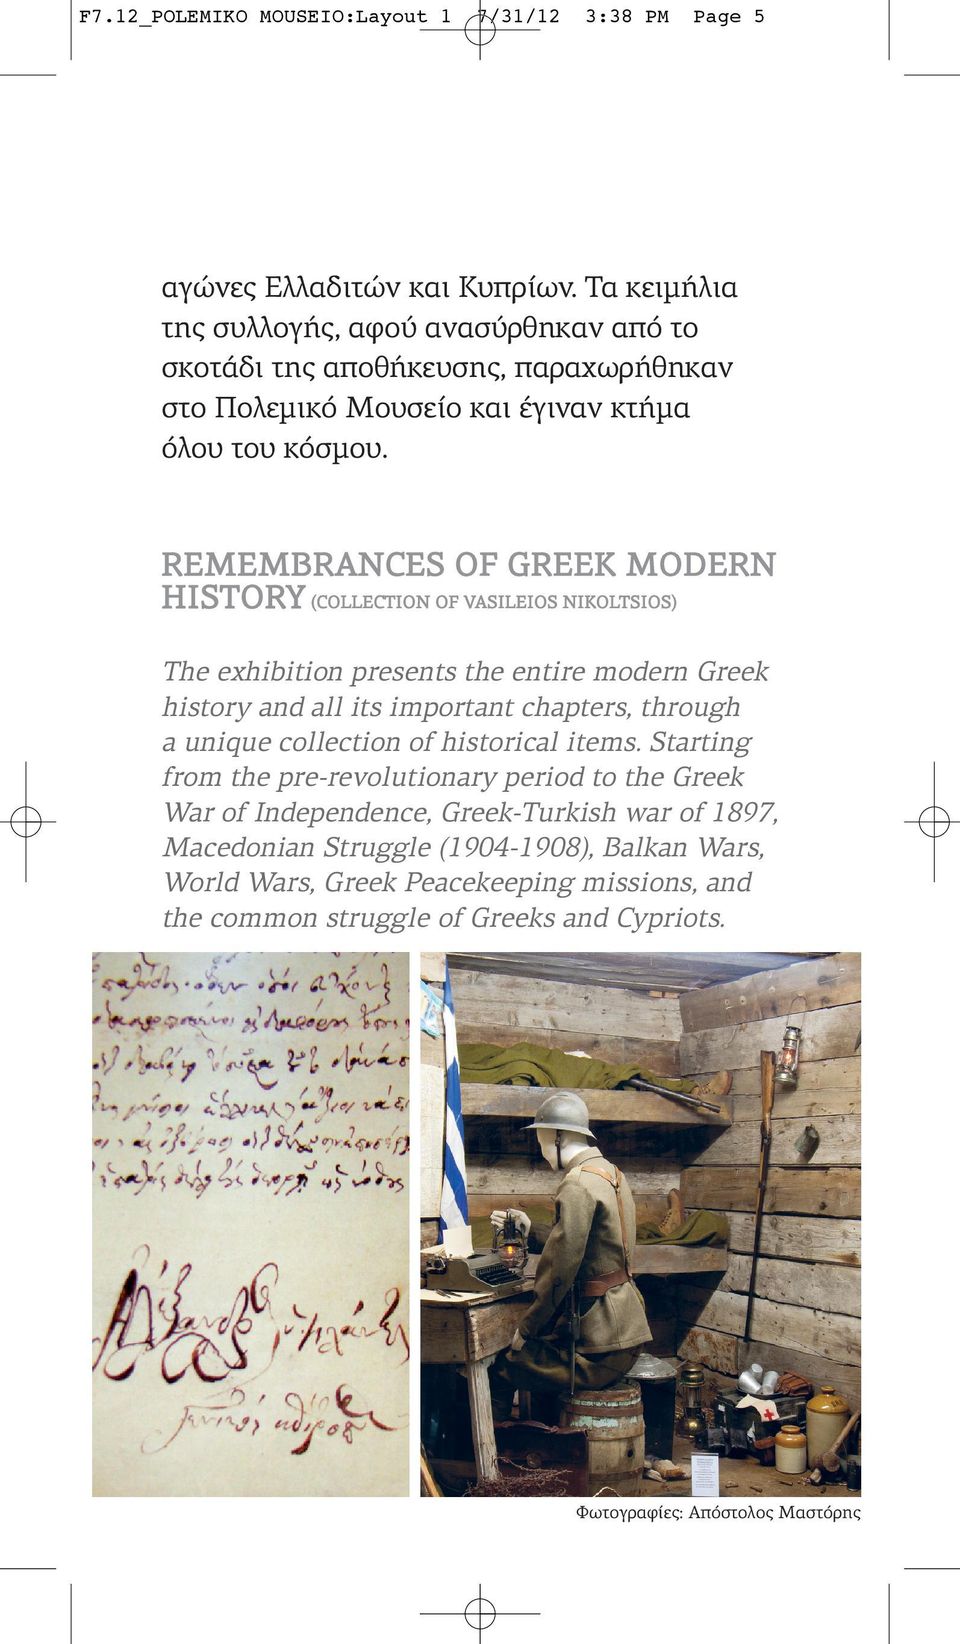 REMEMBRANCES OF GREEK MODERN HISTORY (COLLECTION OF VASILEIOS NIKOLTSIOS) The exhibition presents the entire modern Greek history and all its important chapters, through a